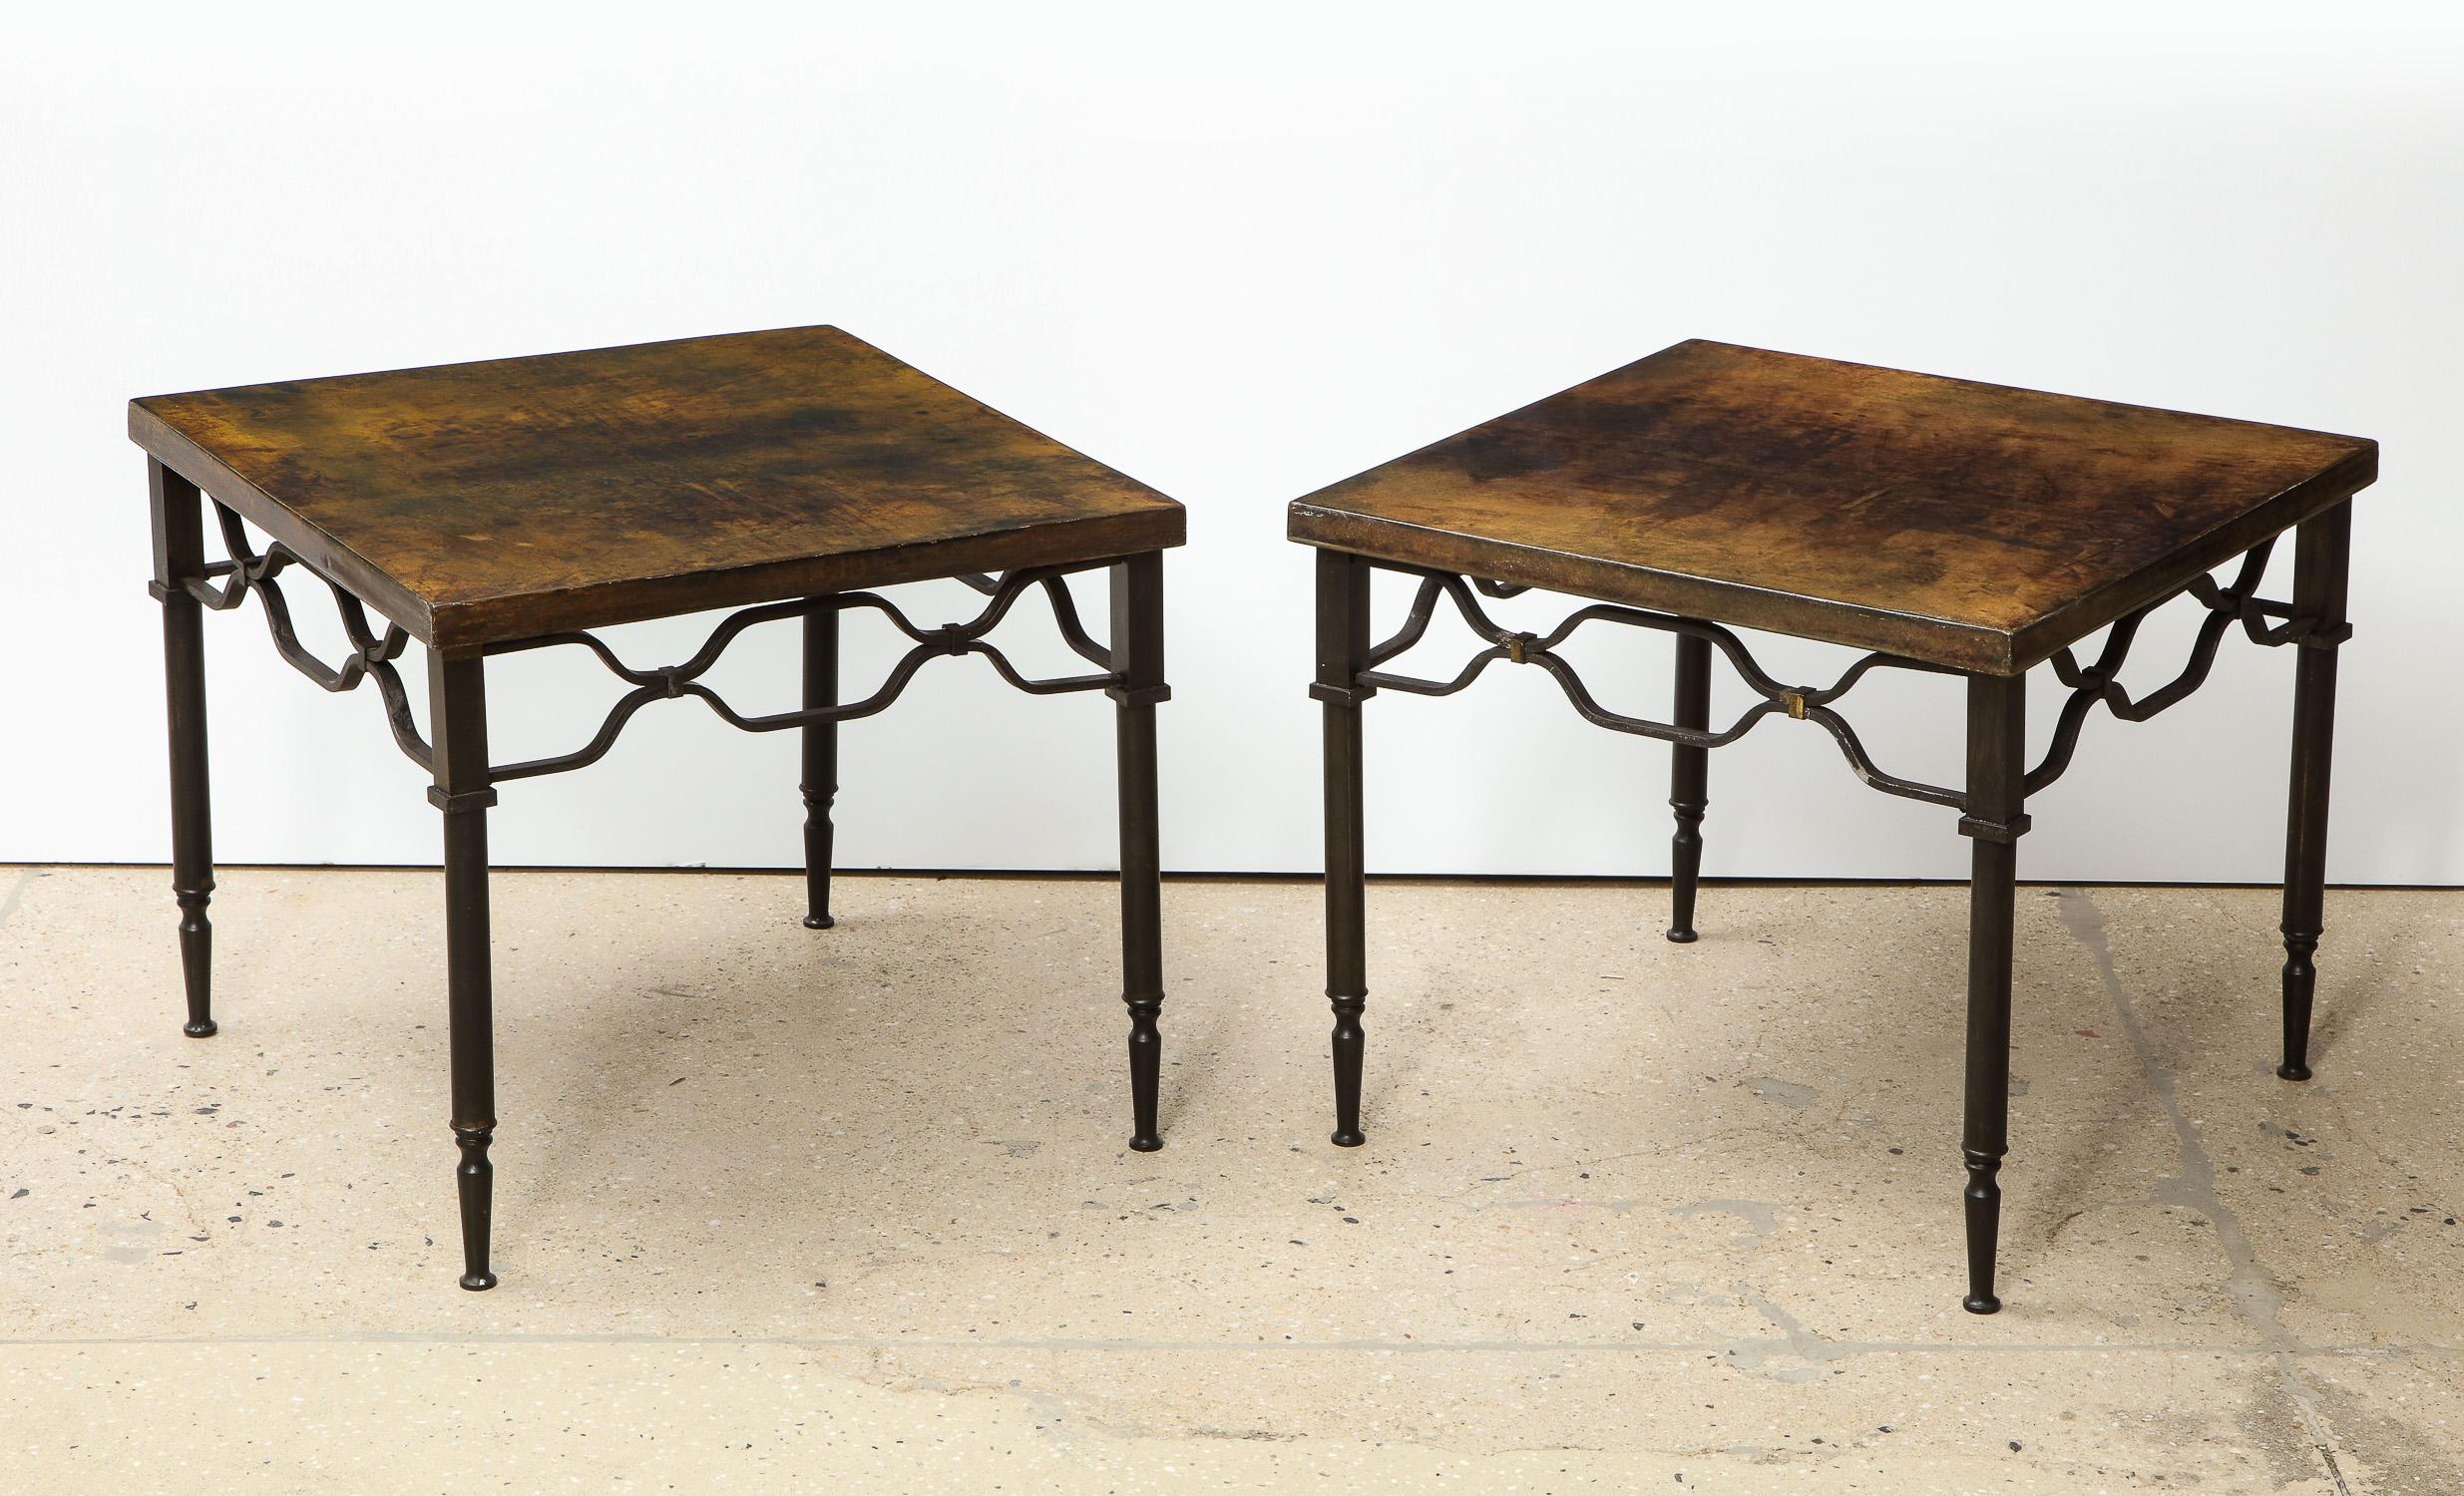 Lacquered goat skin and brass end tables by Aldo Tura.